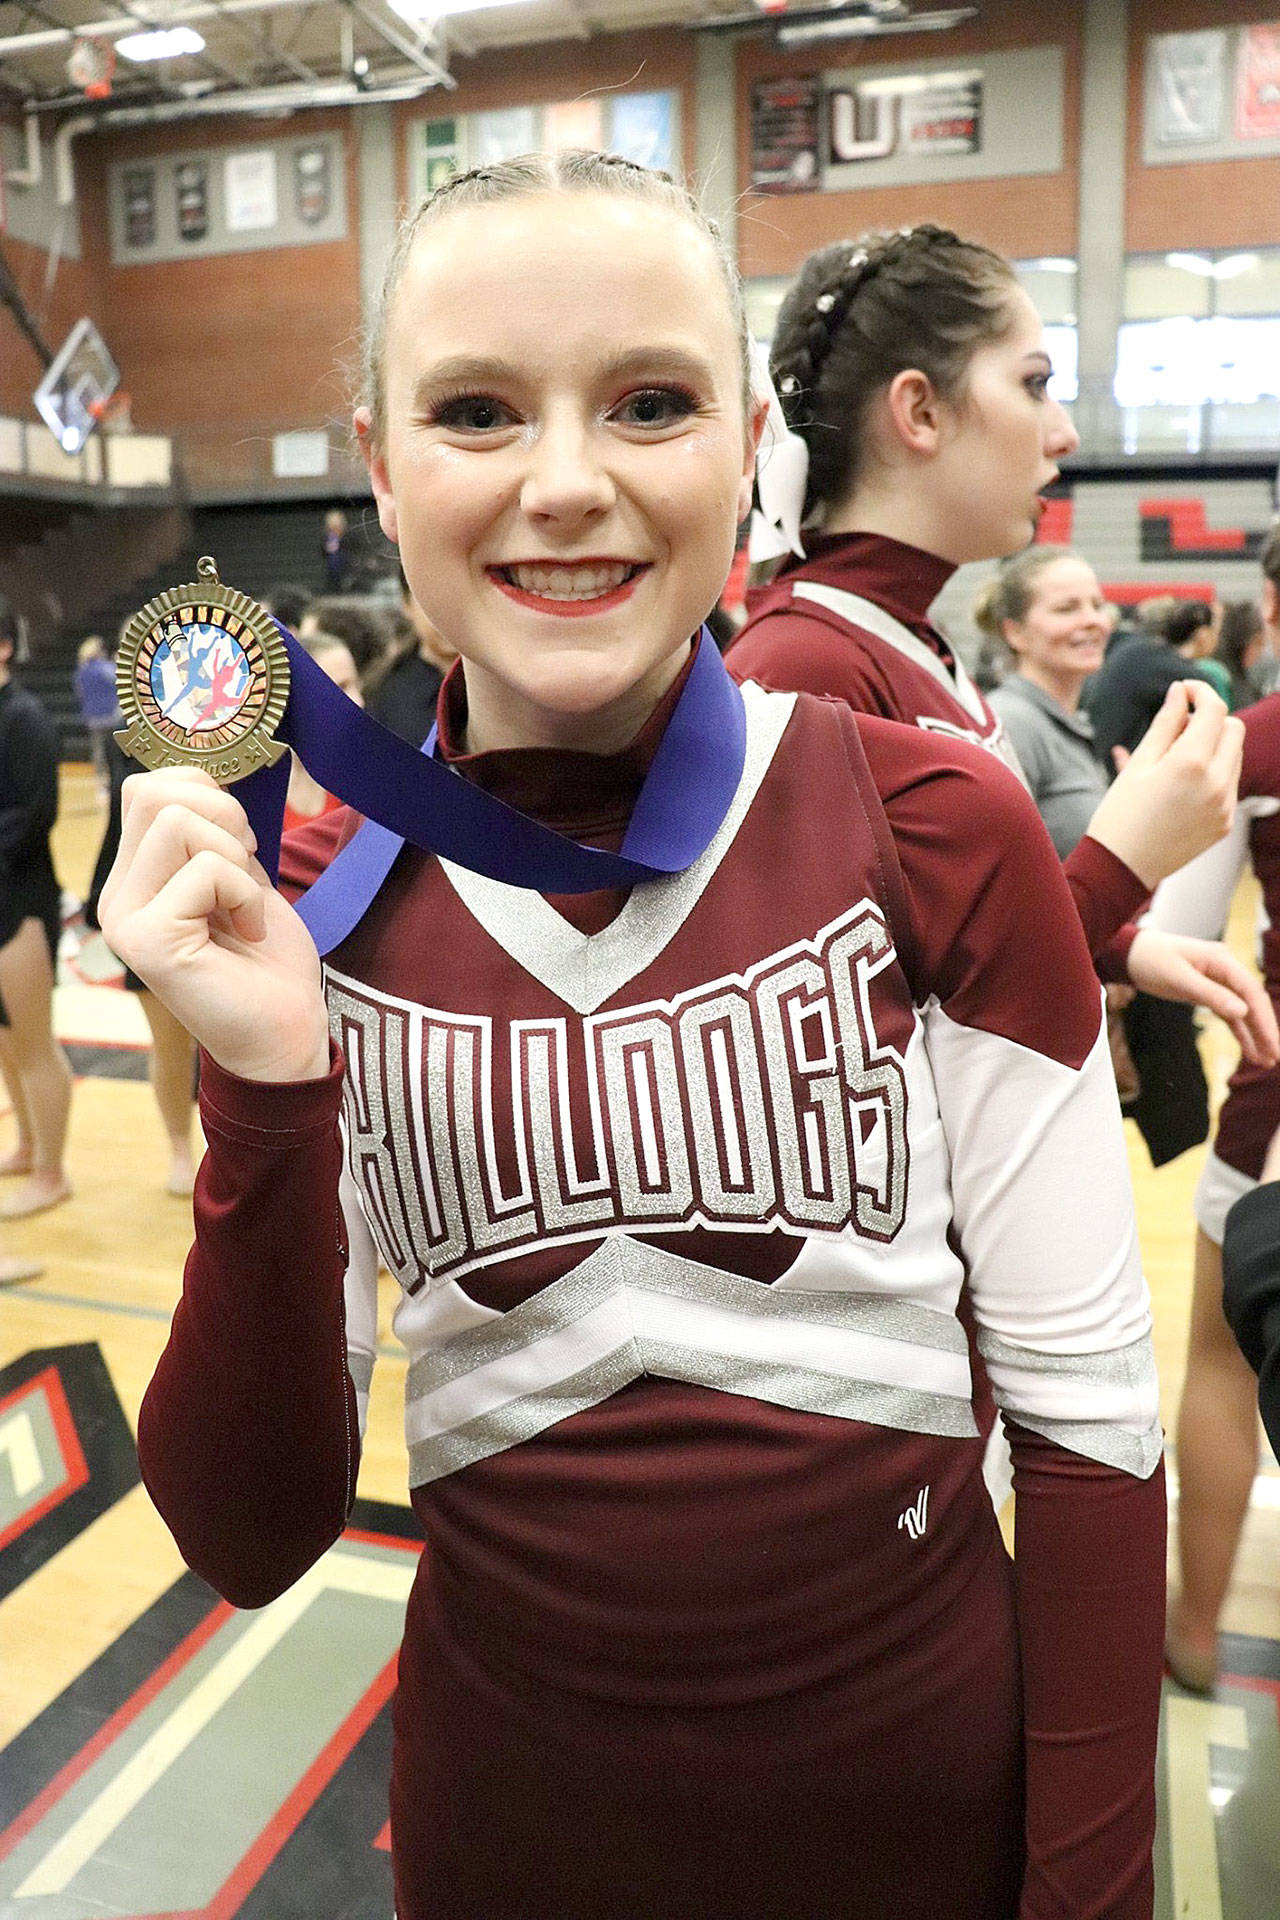 Monte cheer and dance squad qualifies for state